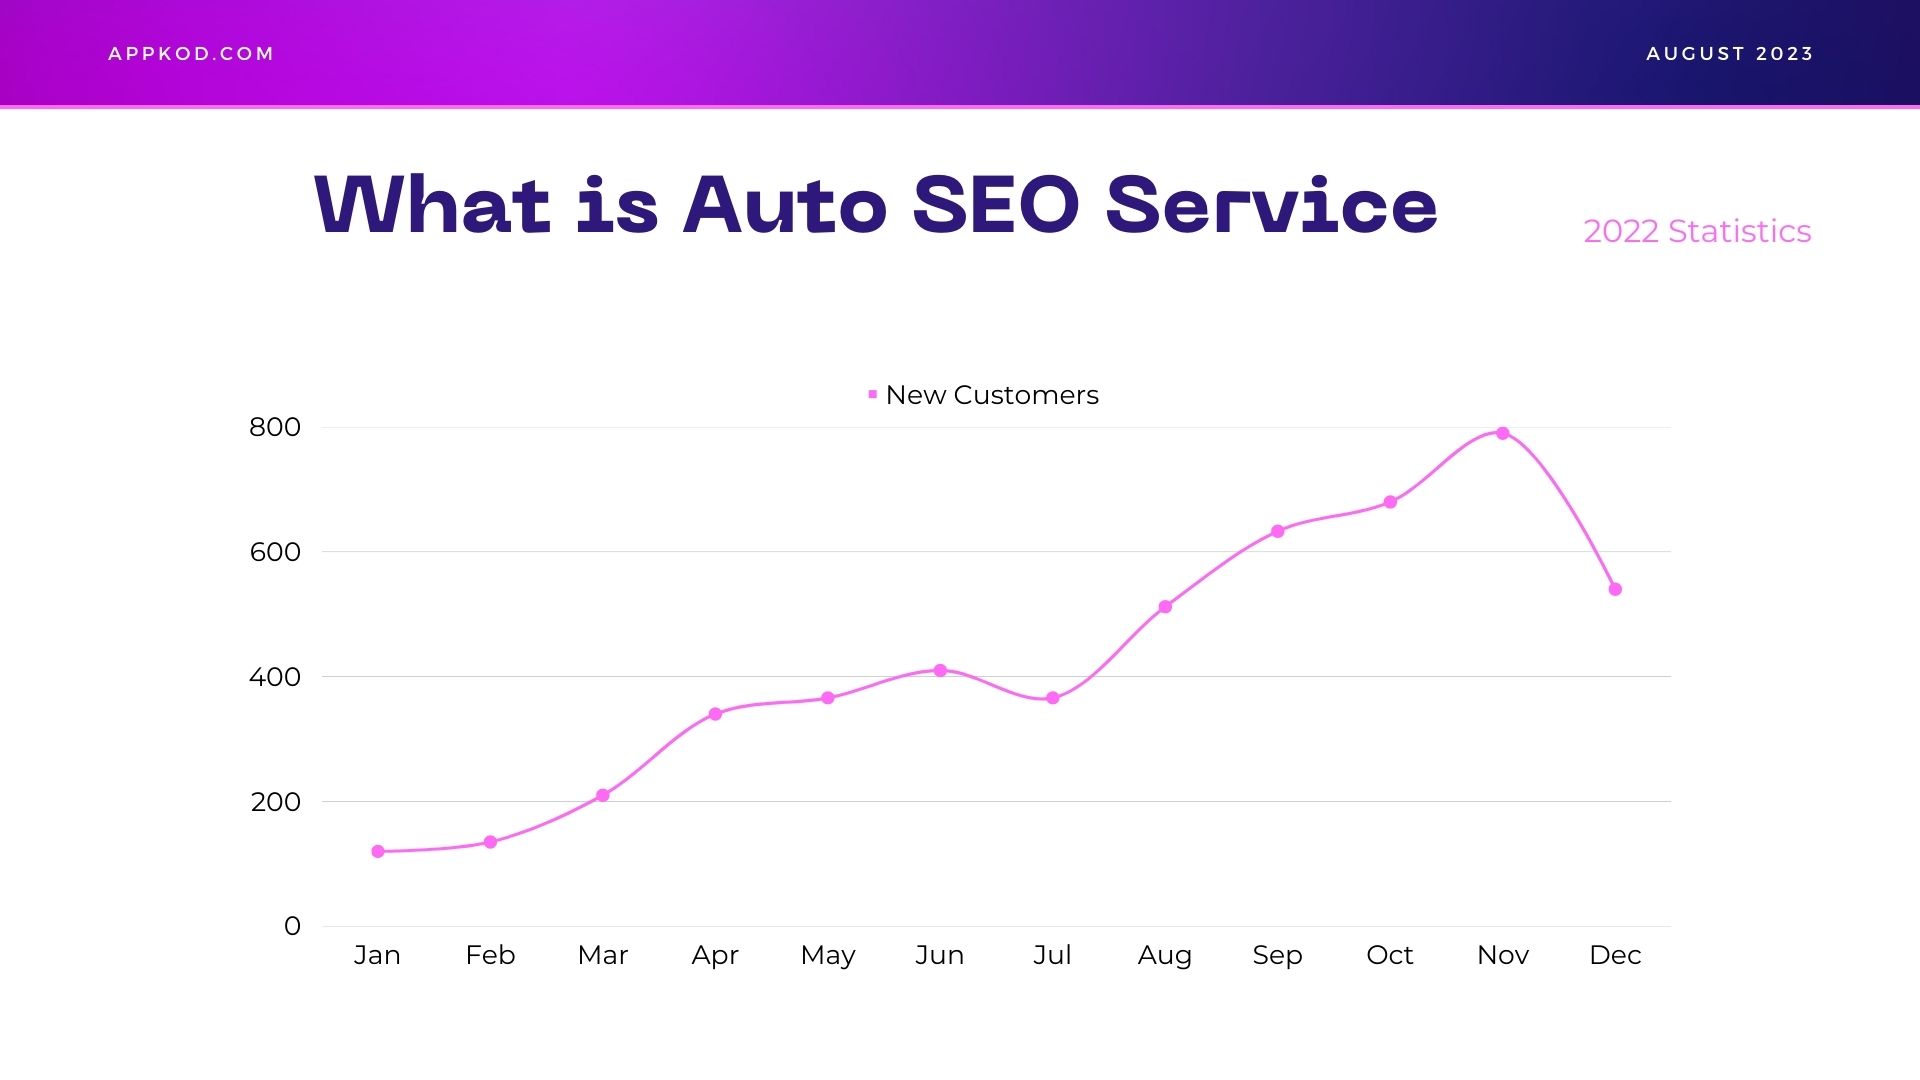 What is Auto SEO Service